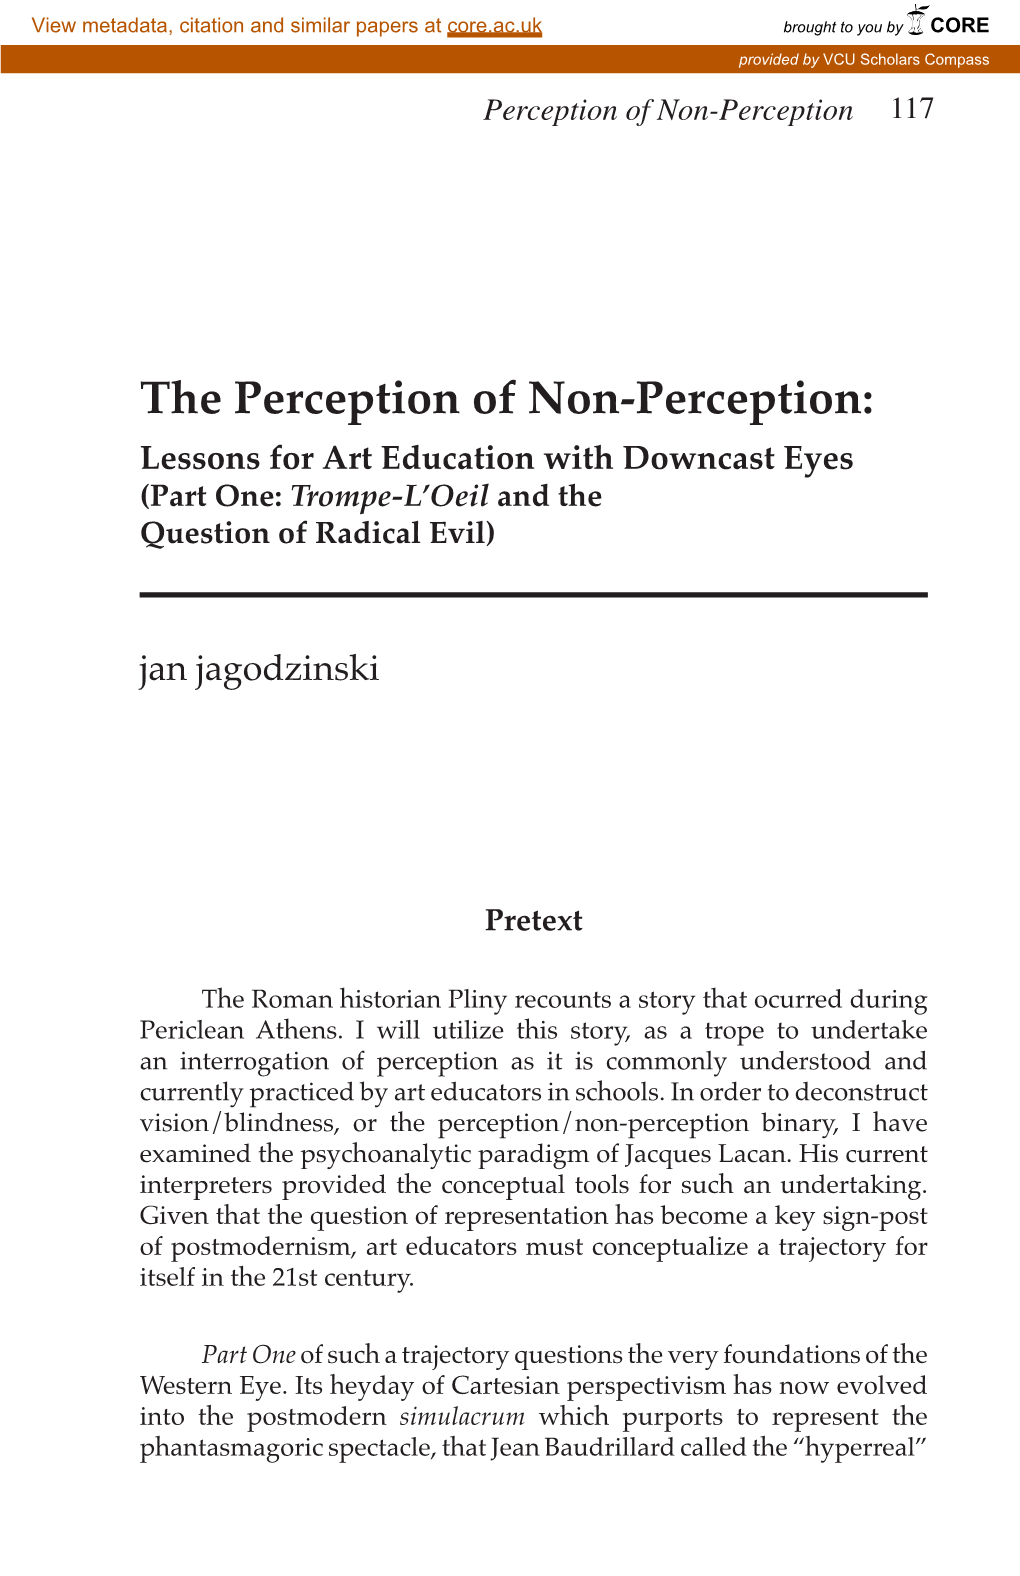 The Perception of Non-Perception: Lessons for Art Education with Downcast Eyes (Part One: Trompe-L’Oeil and the Question of Radical Evil)